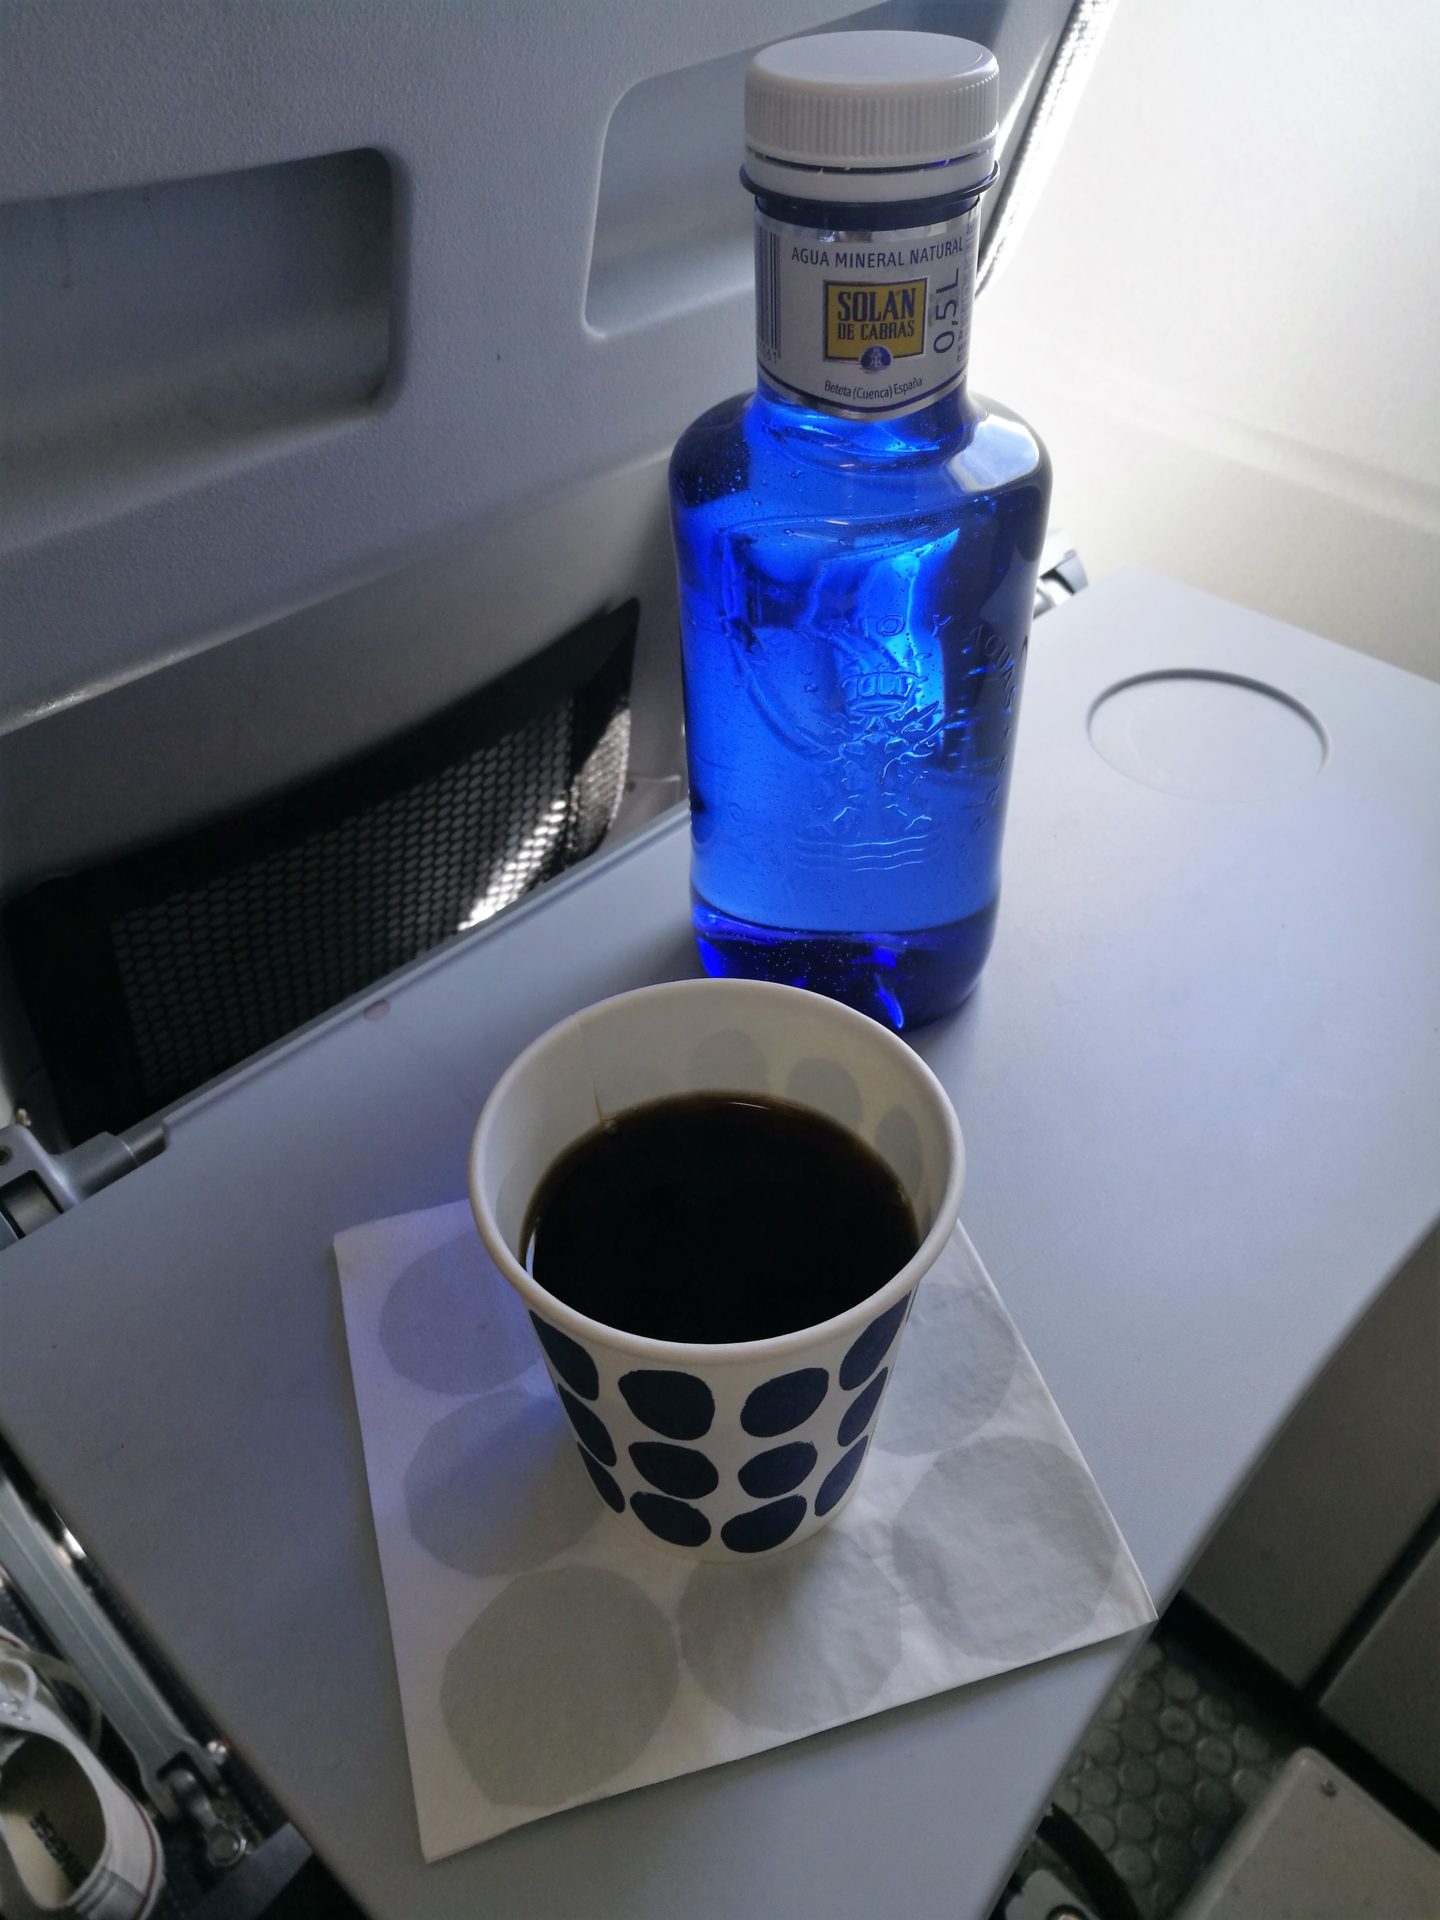 Hasta pronto Madrid Annimarian Black coffee and a water bottle on the table in a Finnair aircraft